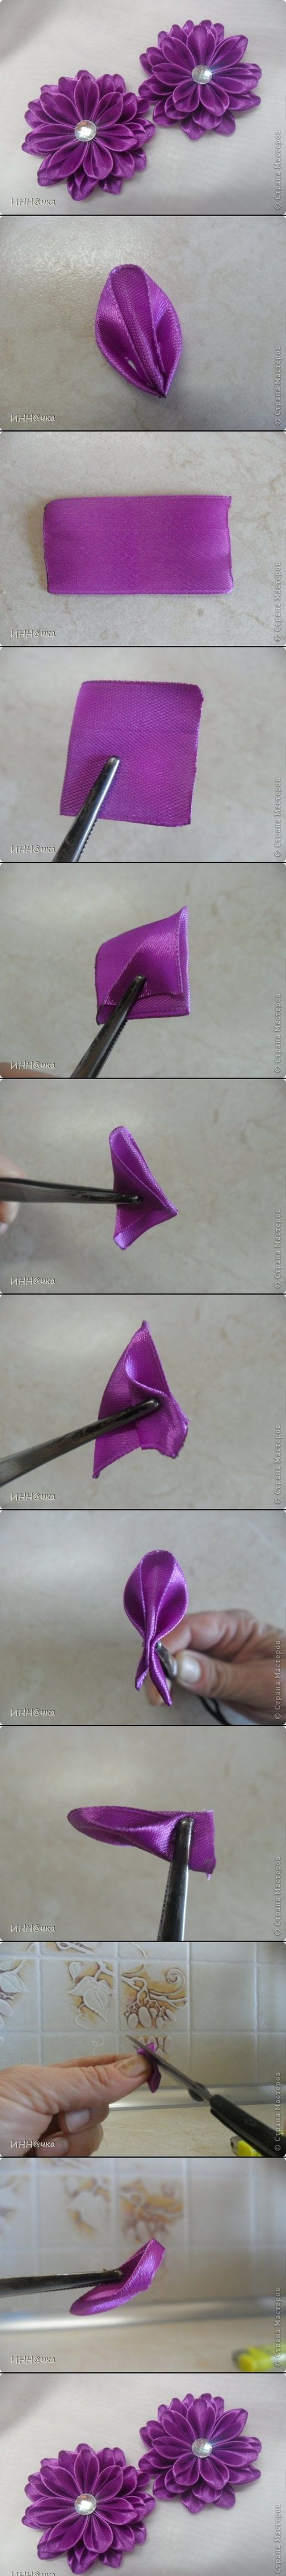 Different Ways to Use Ribbons 4